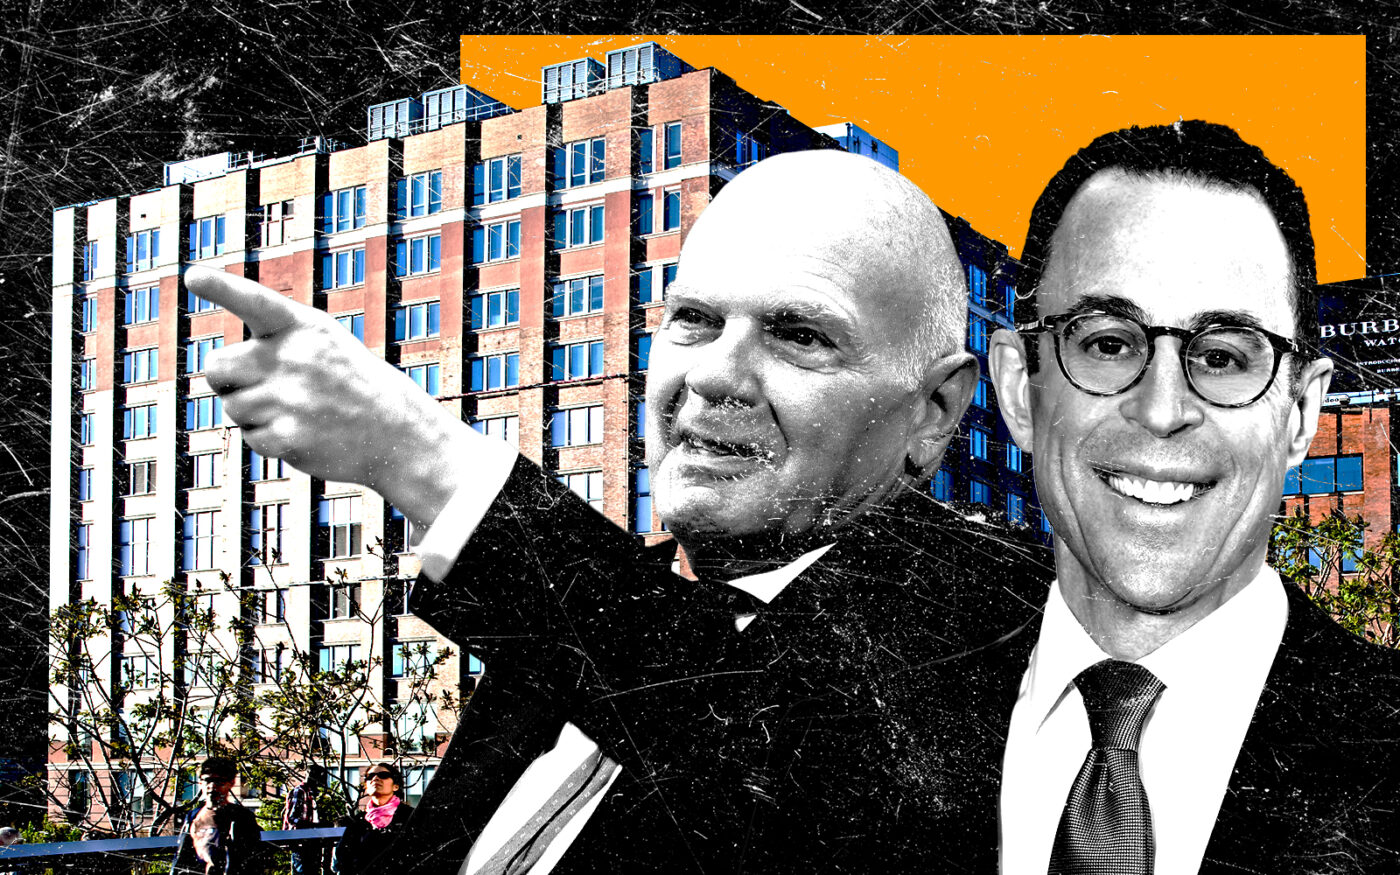 <p>From left: Vornado Realty Trust chair Steven Roth, Related Companies CEO Jeff Blau and 85 Tenth Avenue (Getty, Related Companies, Vornado Realty Trust)</p>
